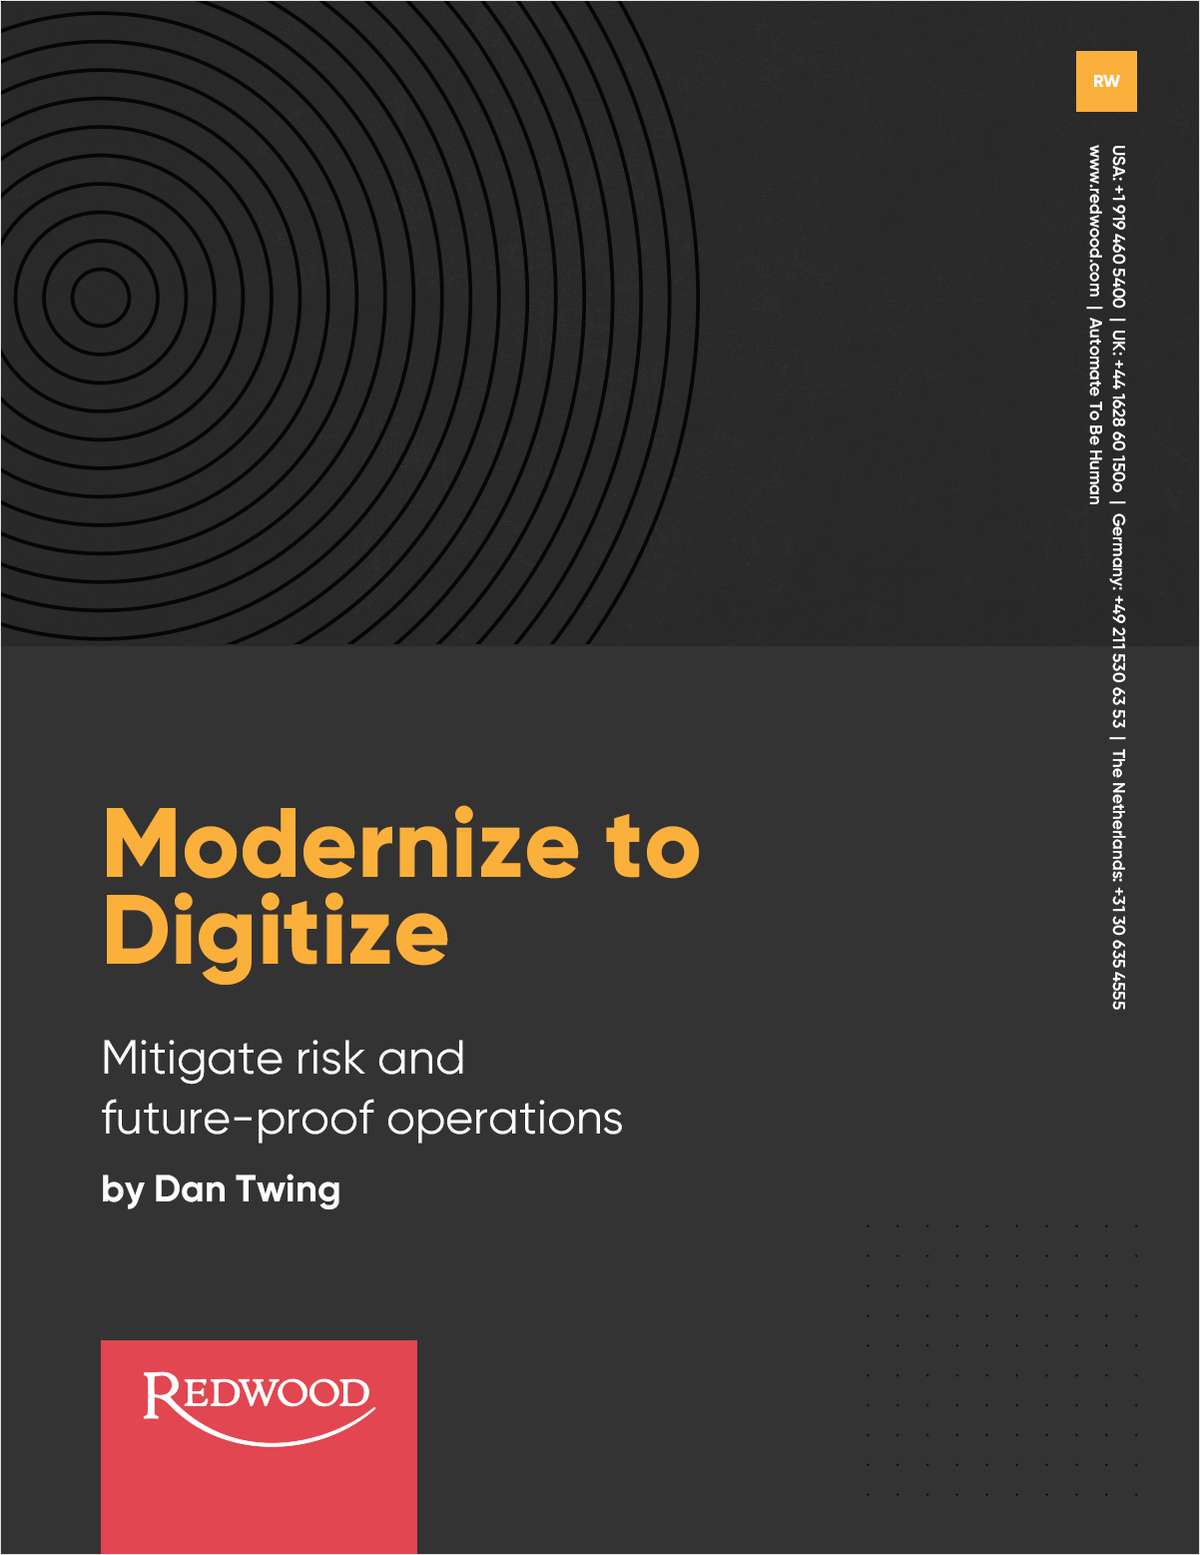 Modernize to Digitize Future-Proof Operations and Mitigate Risk